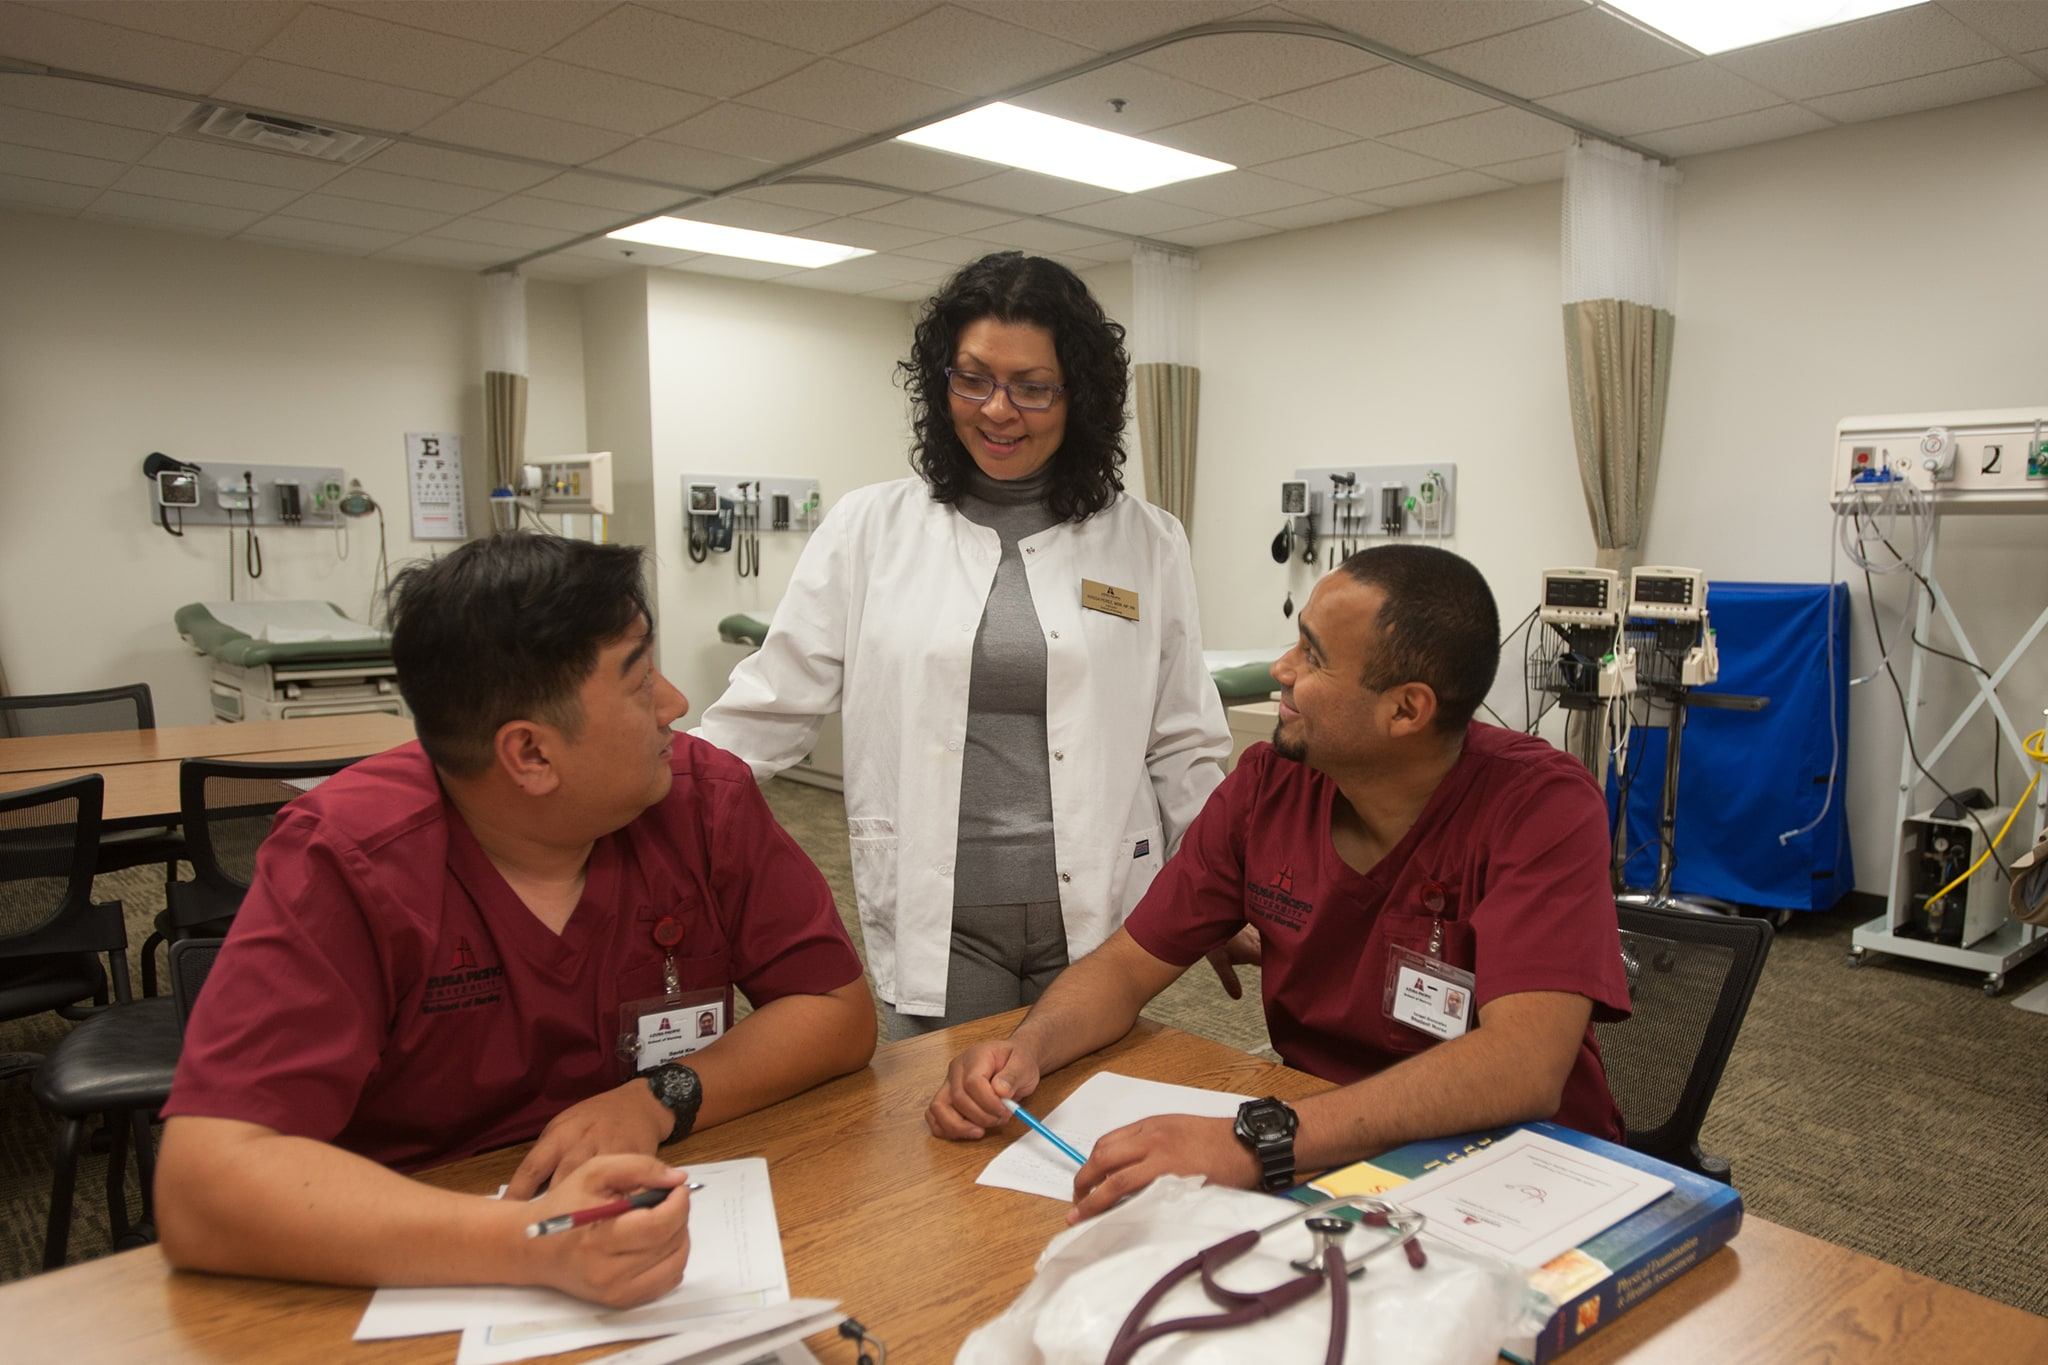 Nurse instructor helping two students